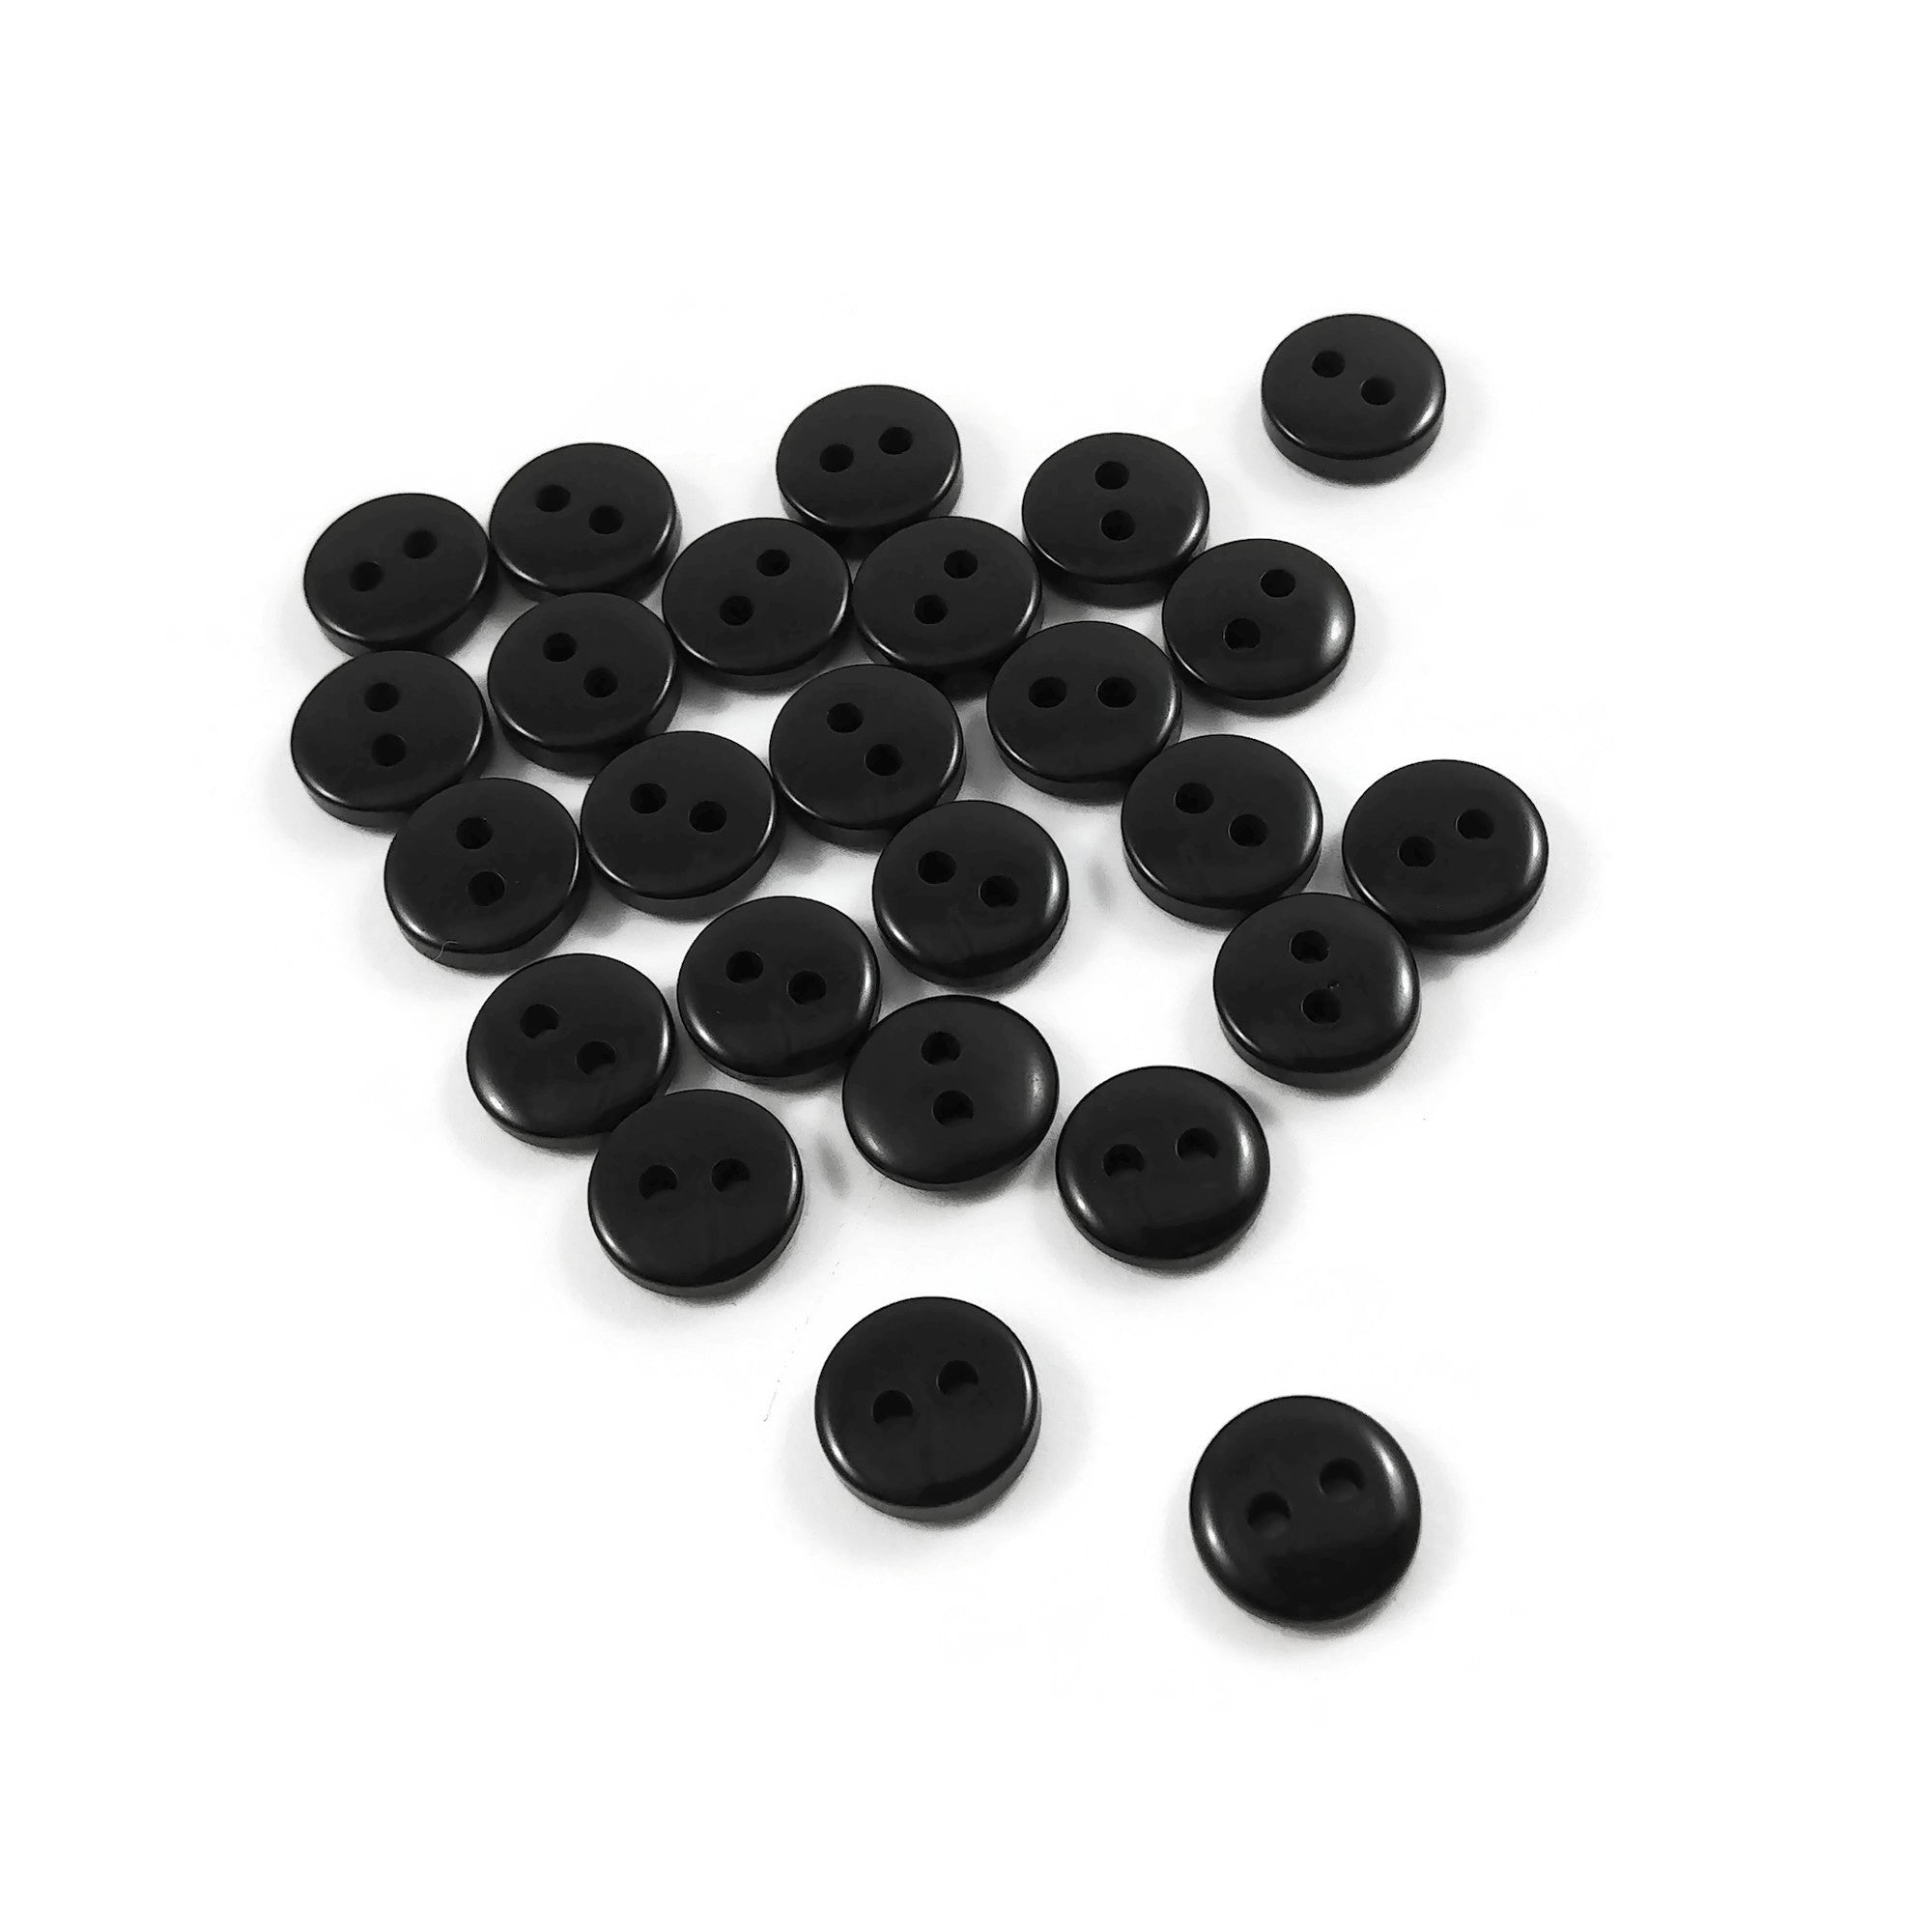 9mm black plastic buttons, Small resin sewing buttons